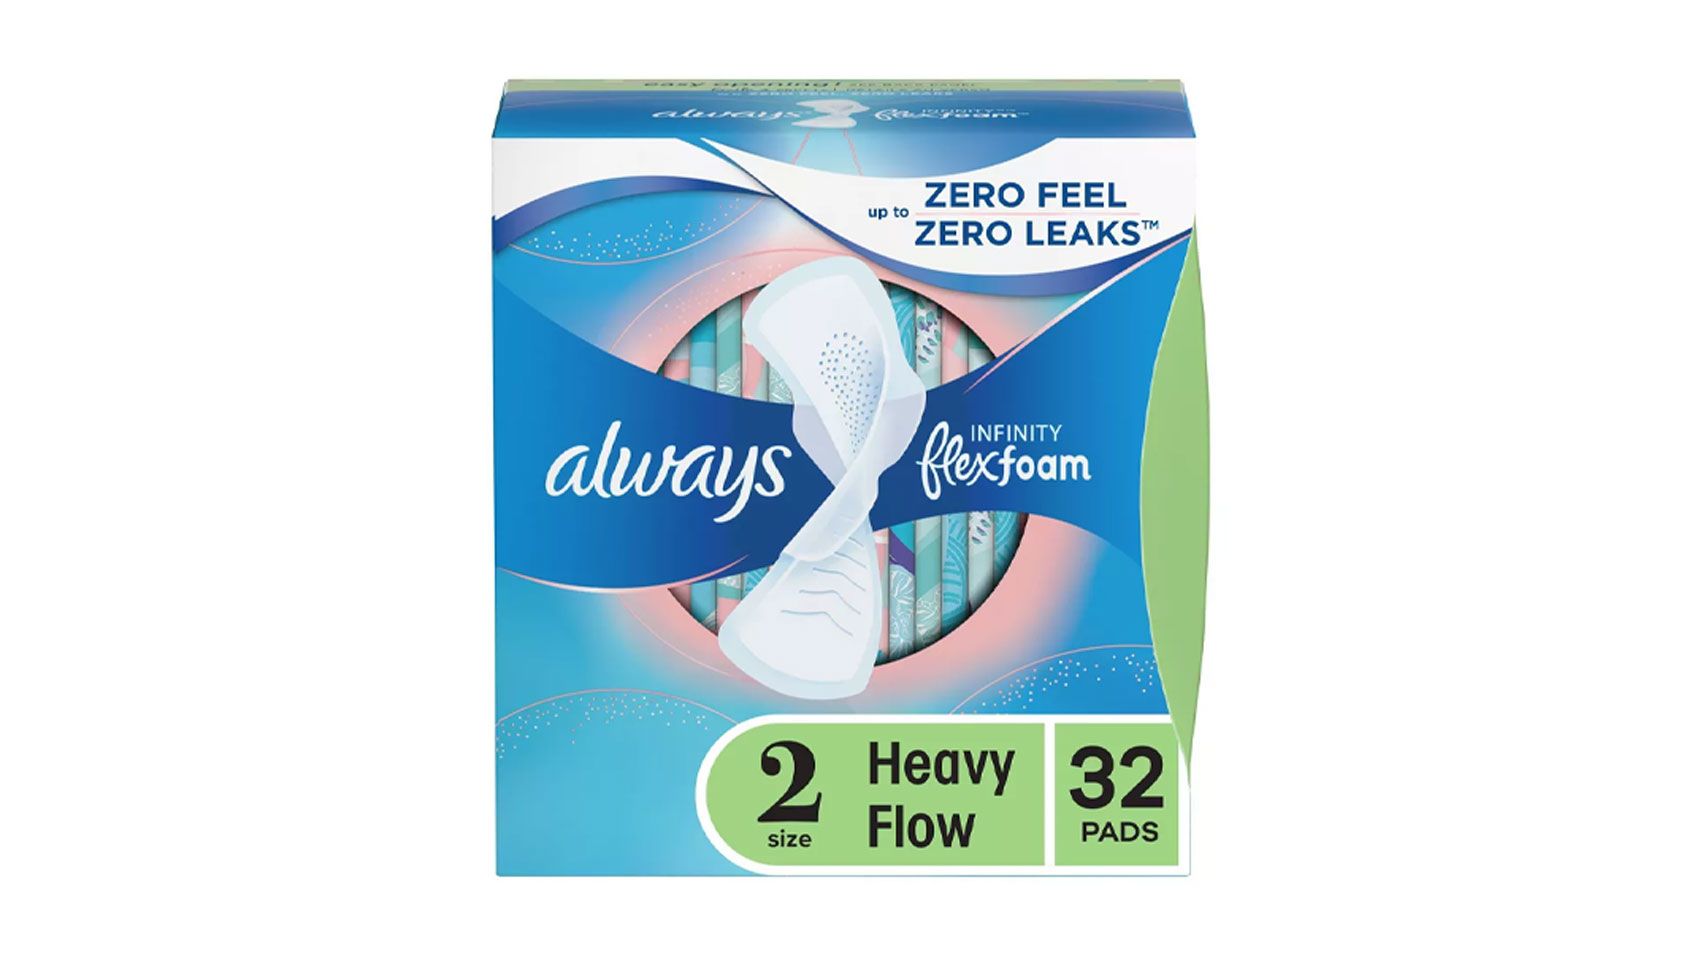 19 Pads for teens ideas  period kit, always pads, pad